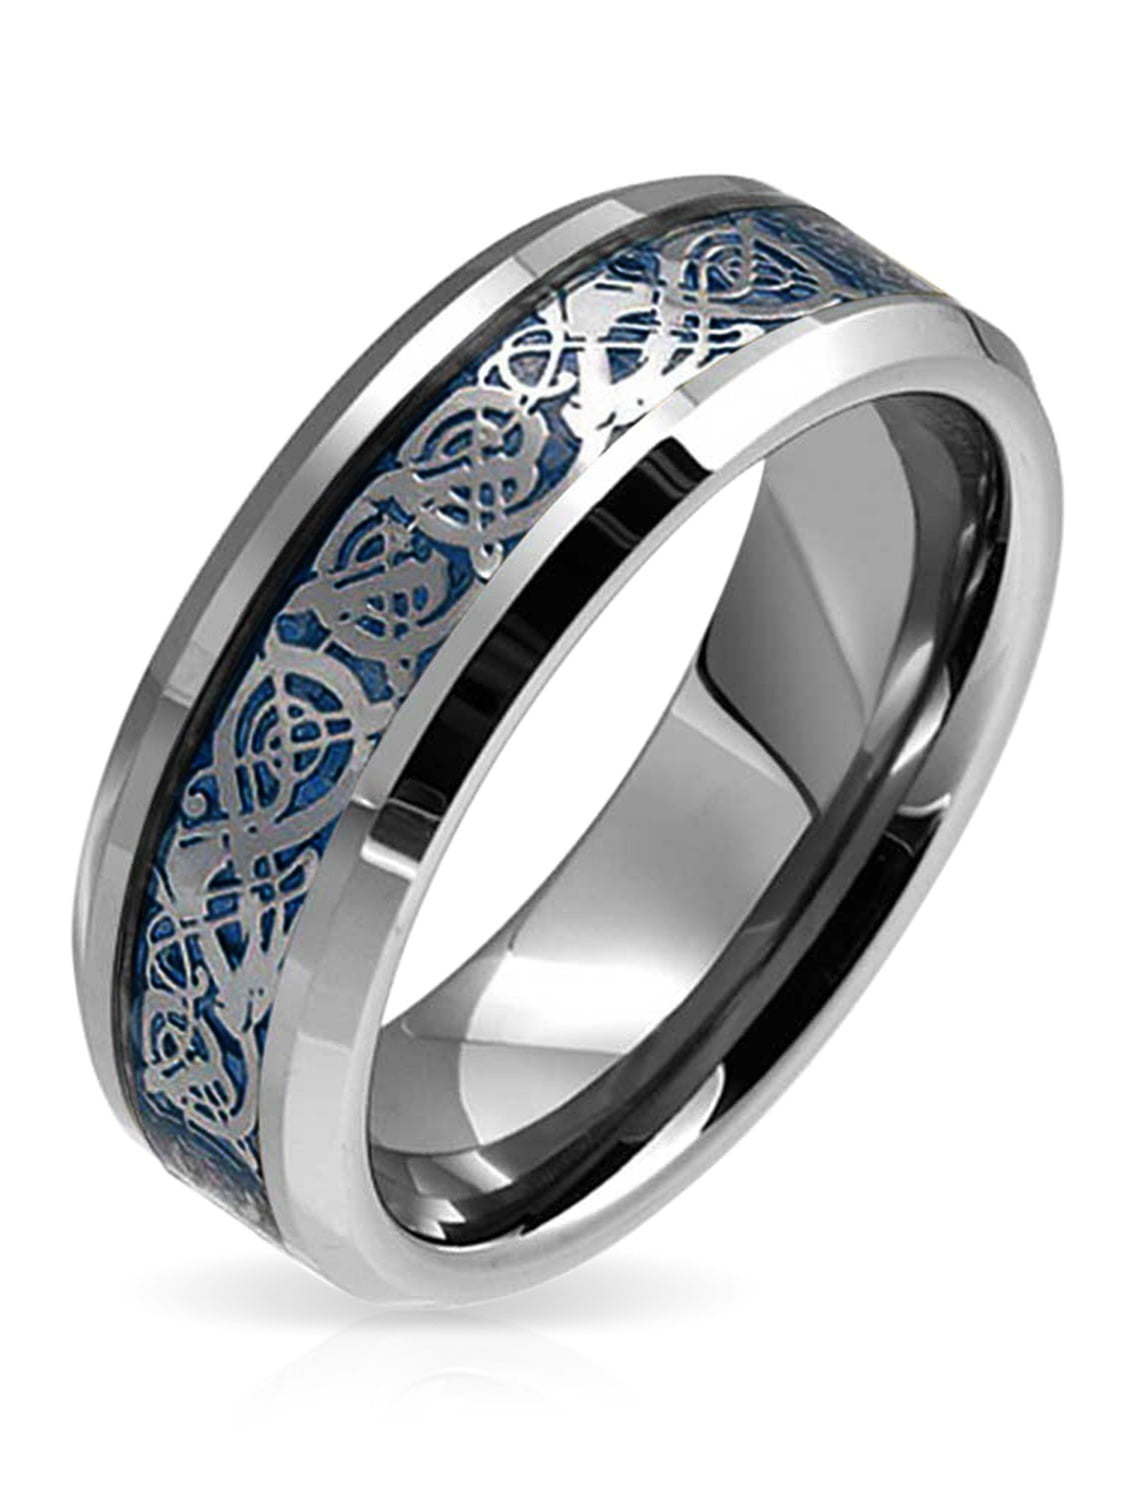 Bling Jewelry - Blue Silver Tone Celtic Knot Dragon Inlay Couples ...